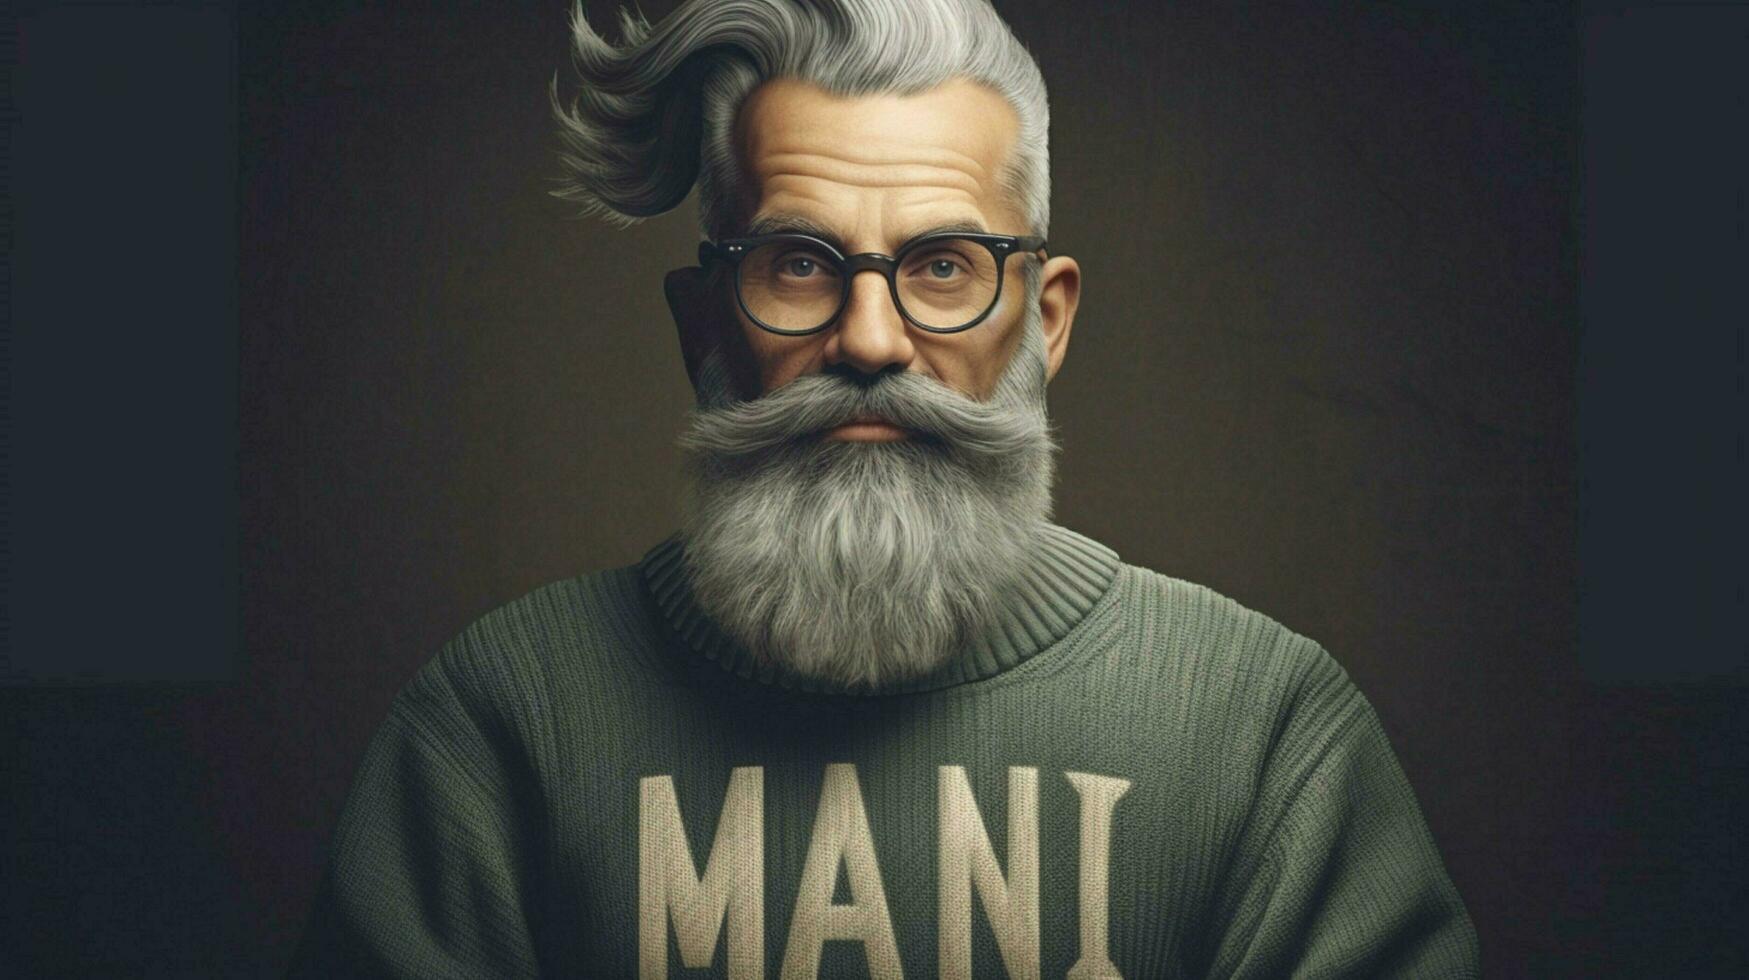 a man with glasses and a beard wearing a sweater photo